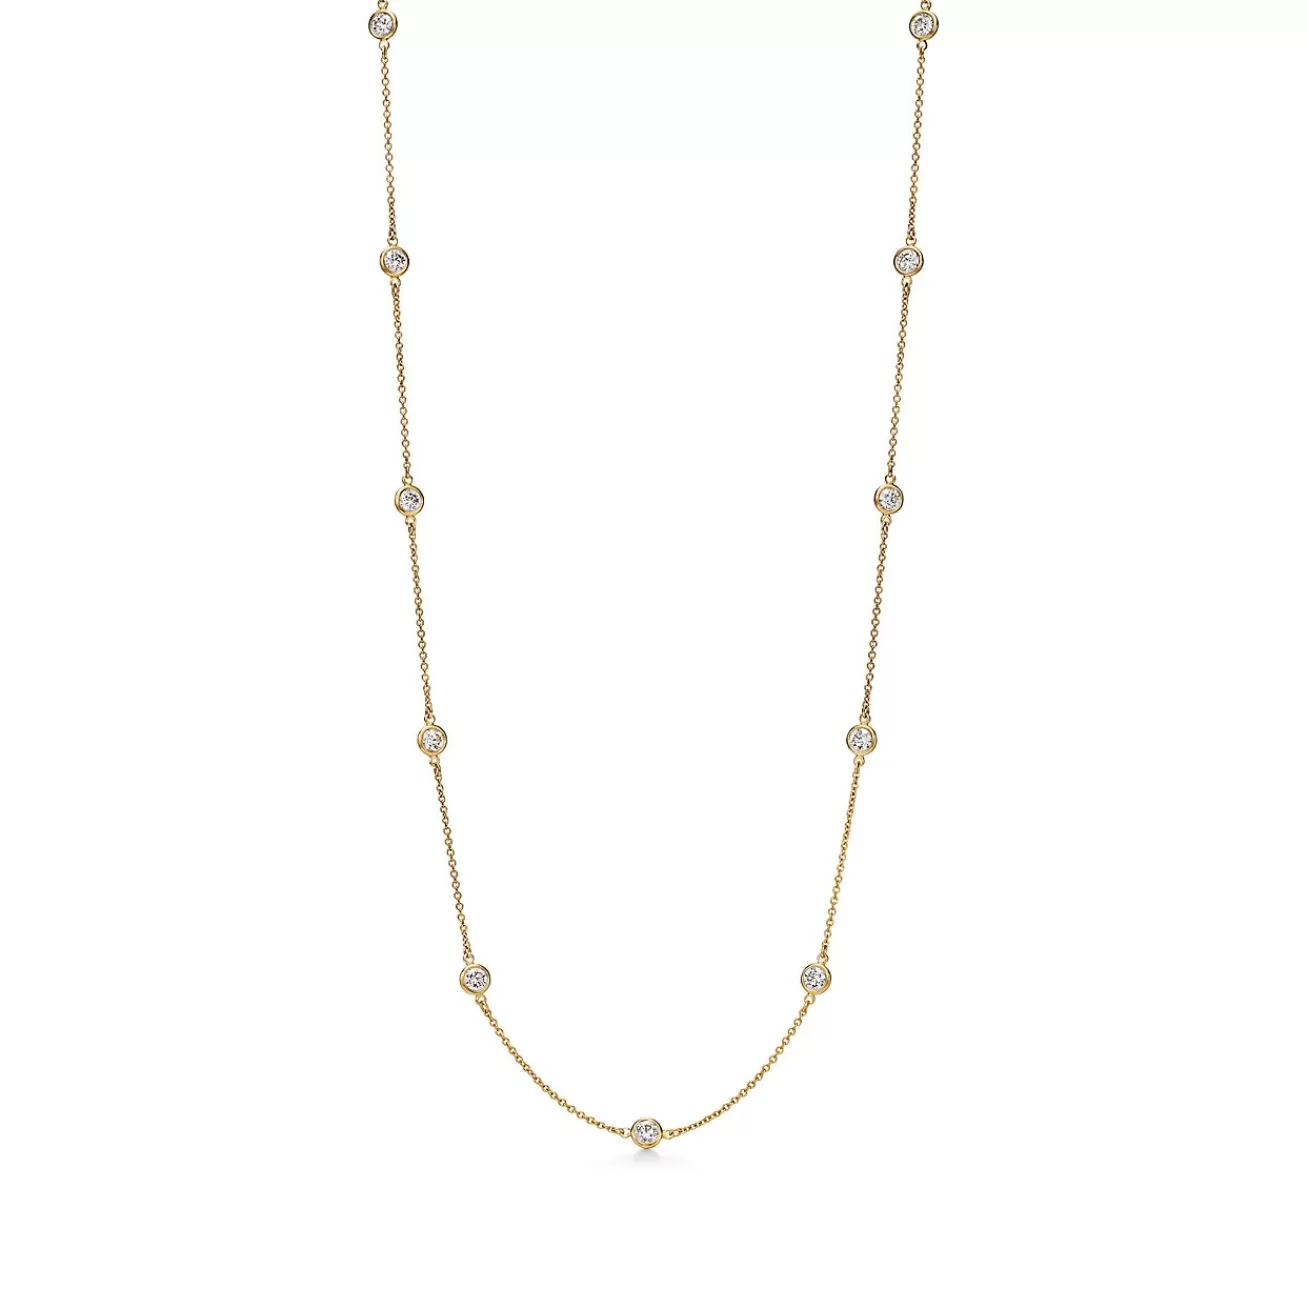 Tiffany & Co. Elsa Peretti® Diamonds by the Yard® 18K Gold Necklace | ^ Necklaces & Pendants | Gold Jewelry